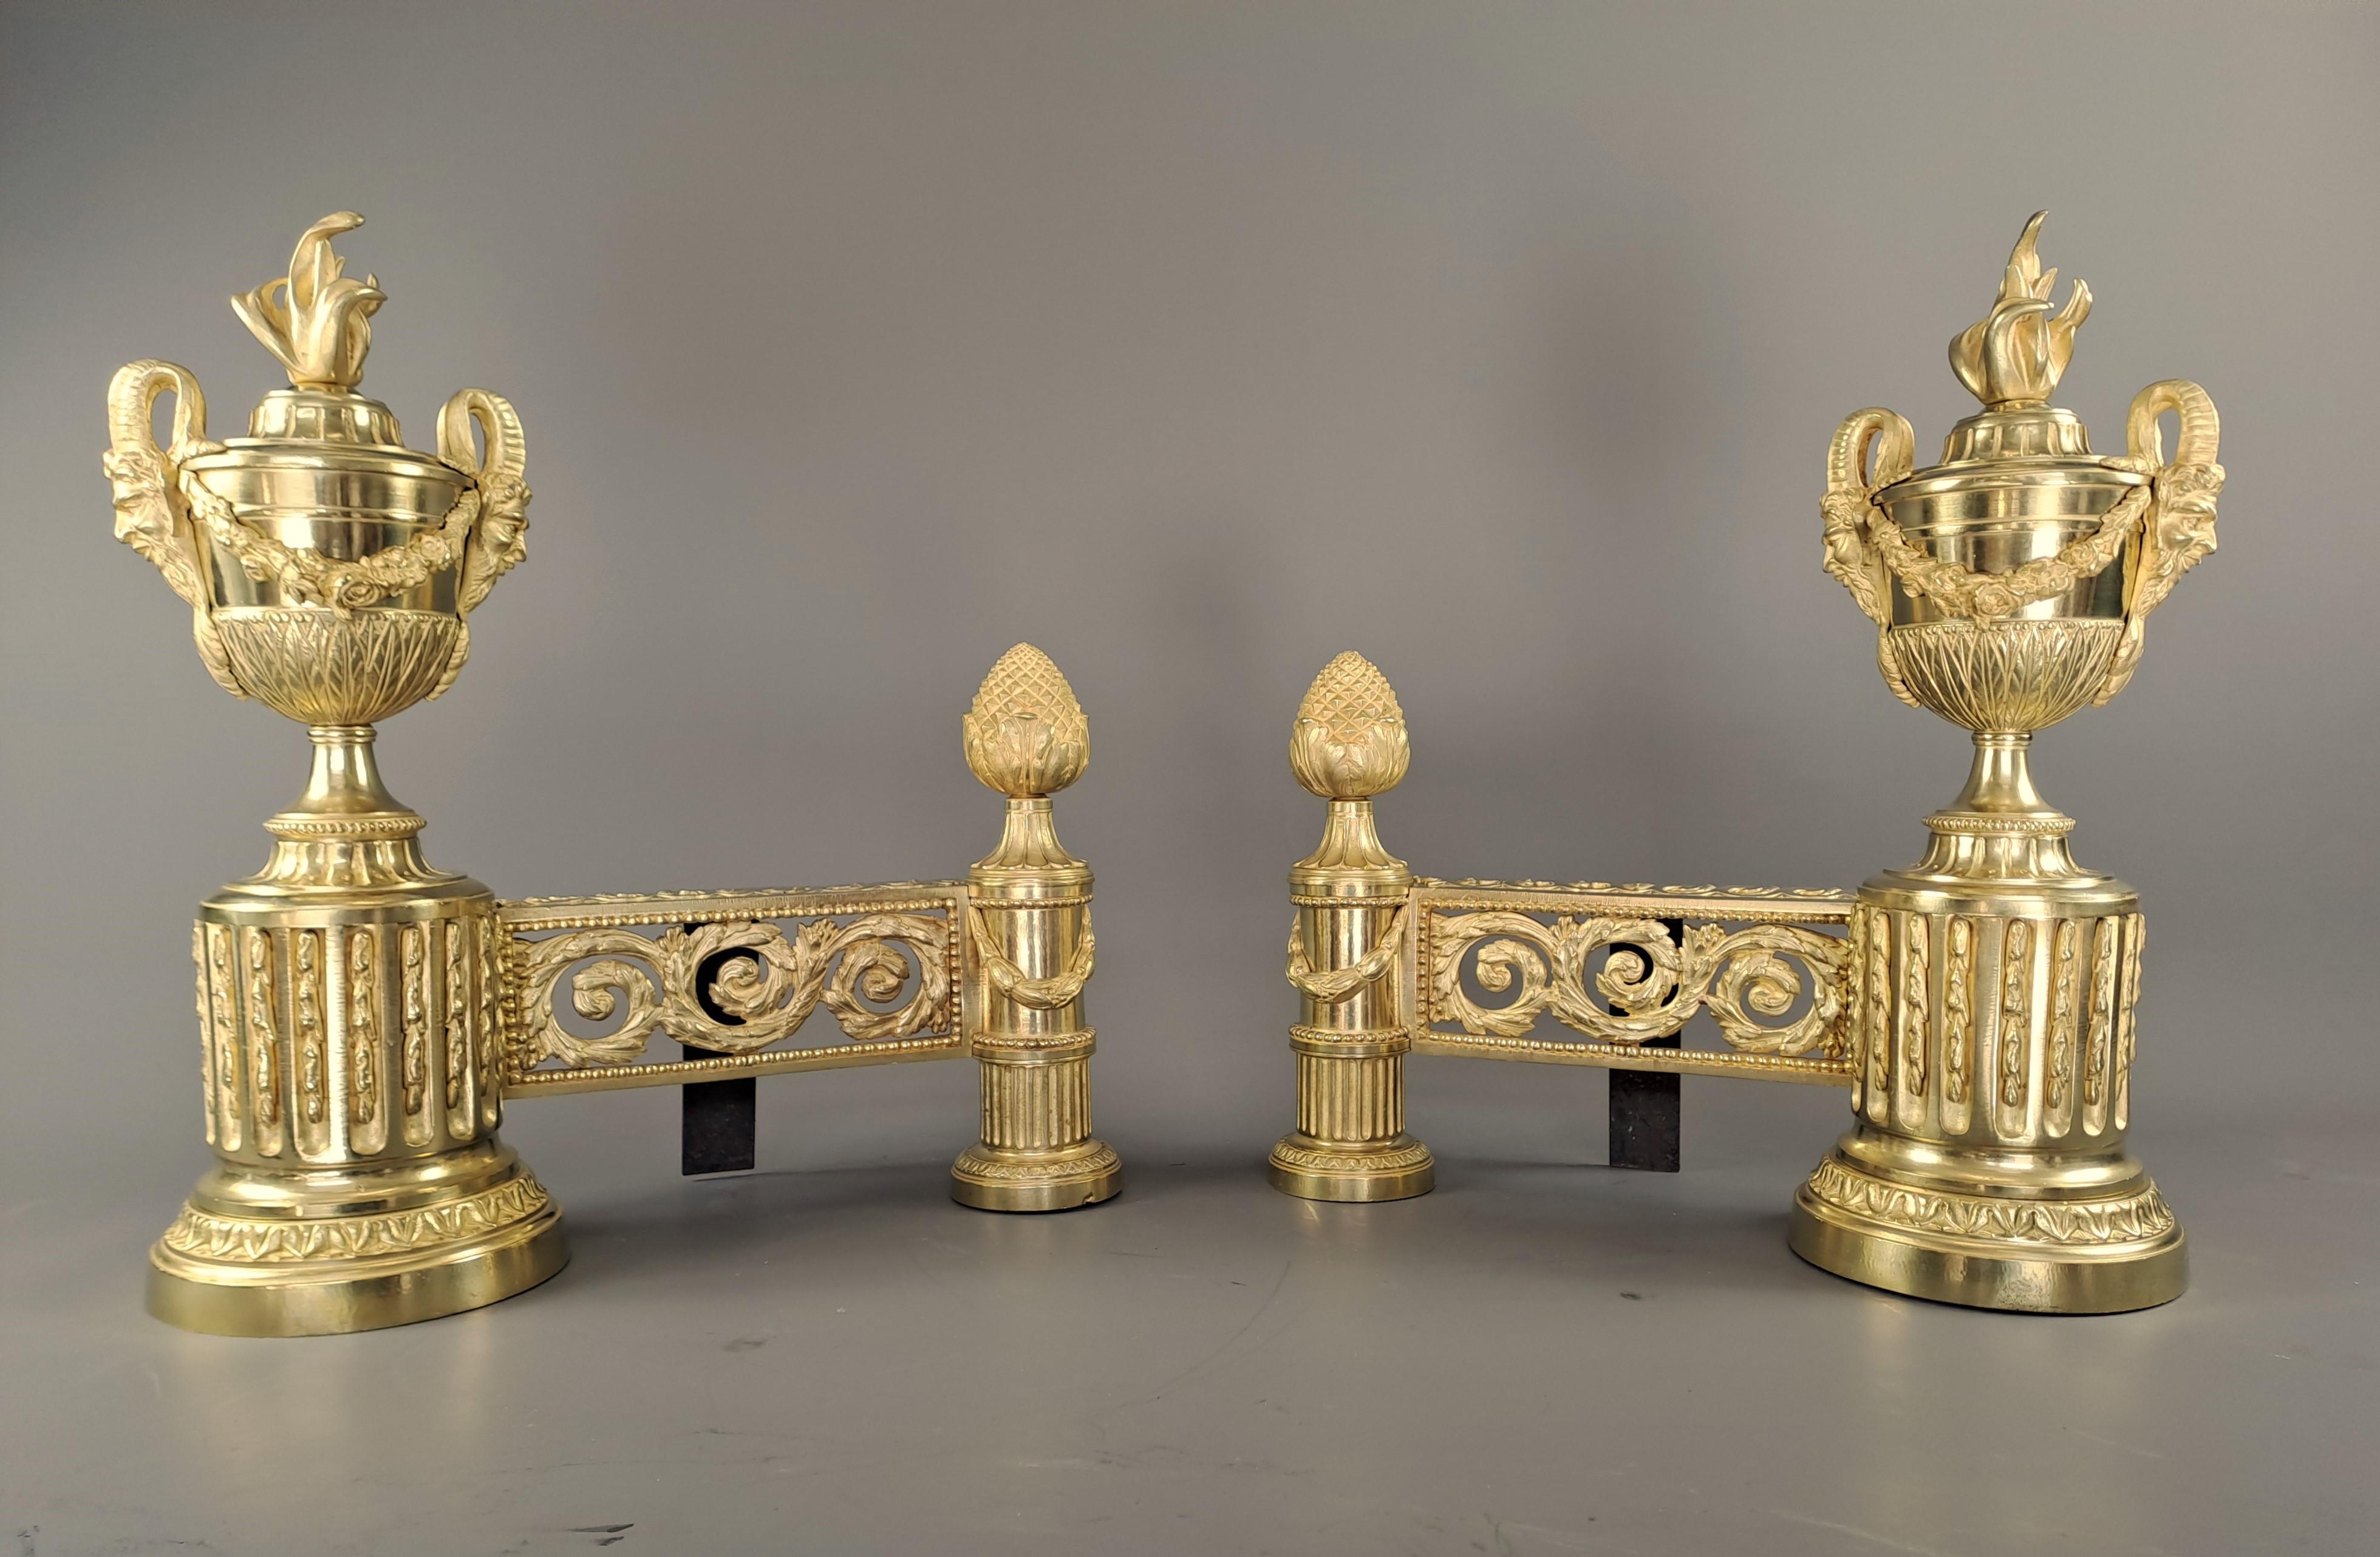 Superb pair of Louis XVI style andirons in very finely chiseled gilded bronze.

Prestigious model presenting a central band composed of openwork scrollwork on the front and a frieze of scrolls on the top, two cylindrical bases support this central